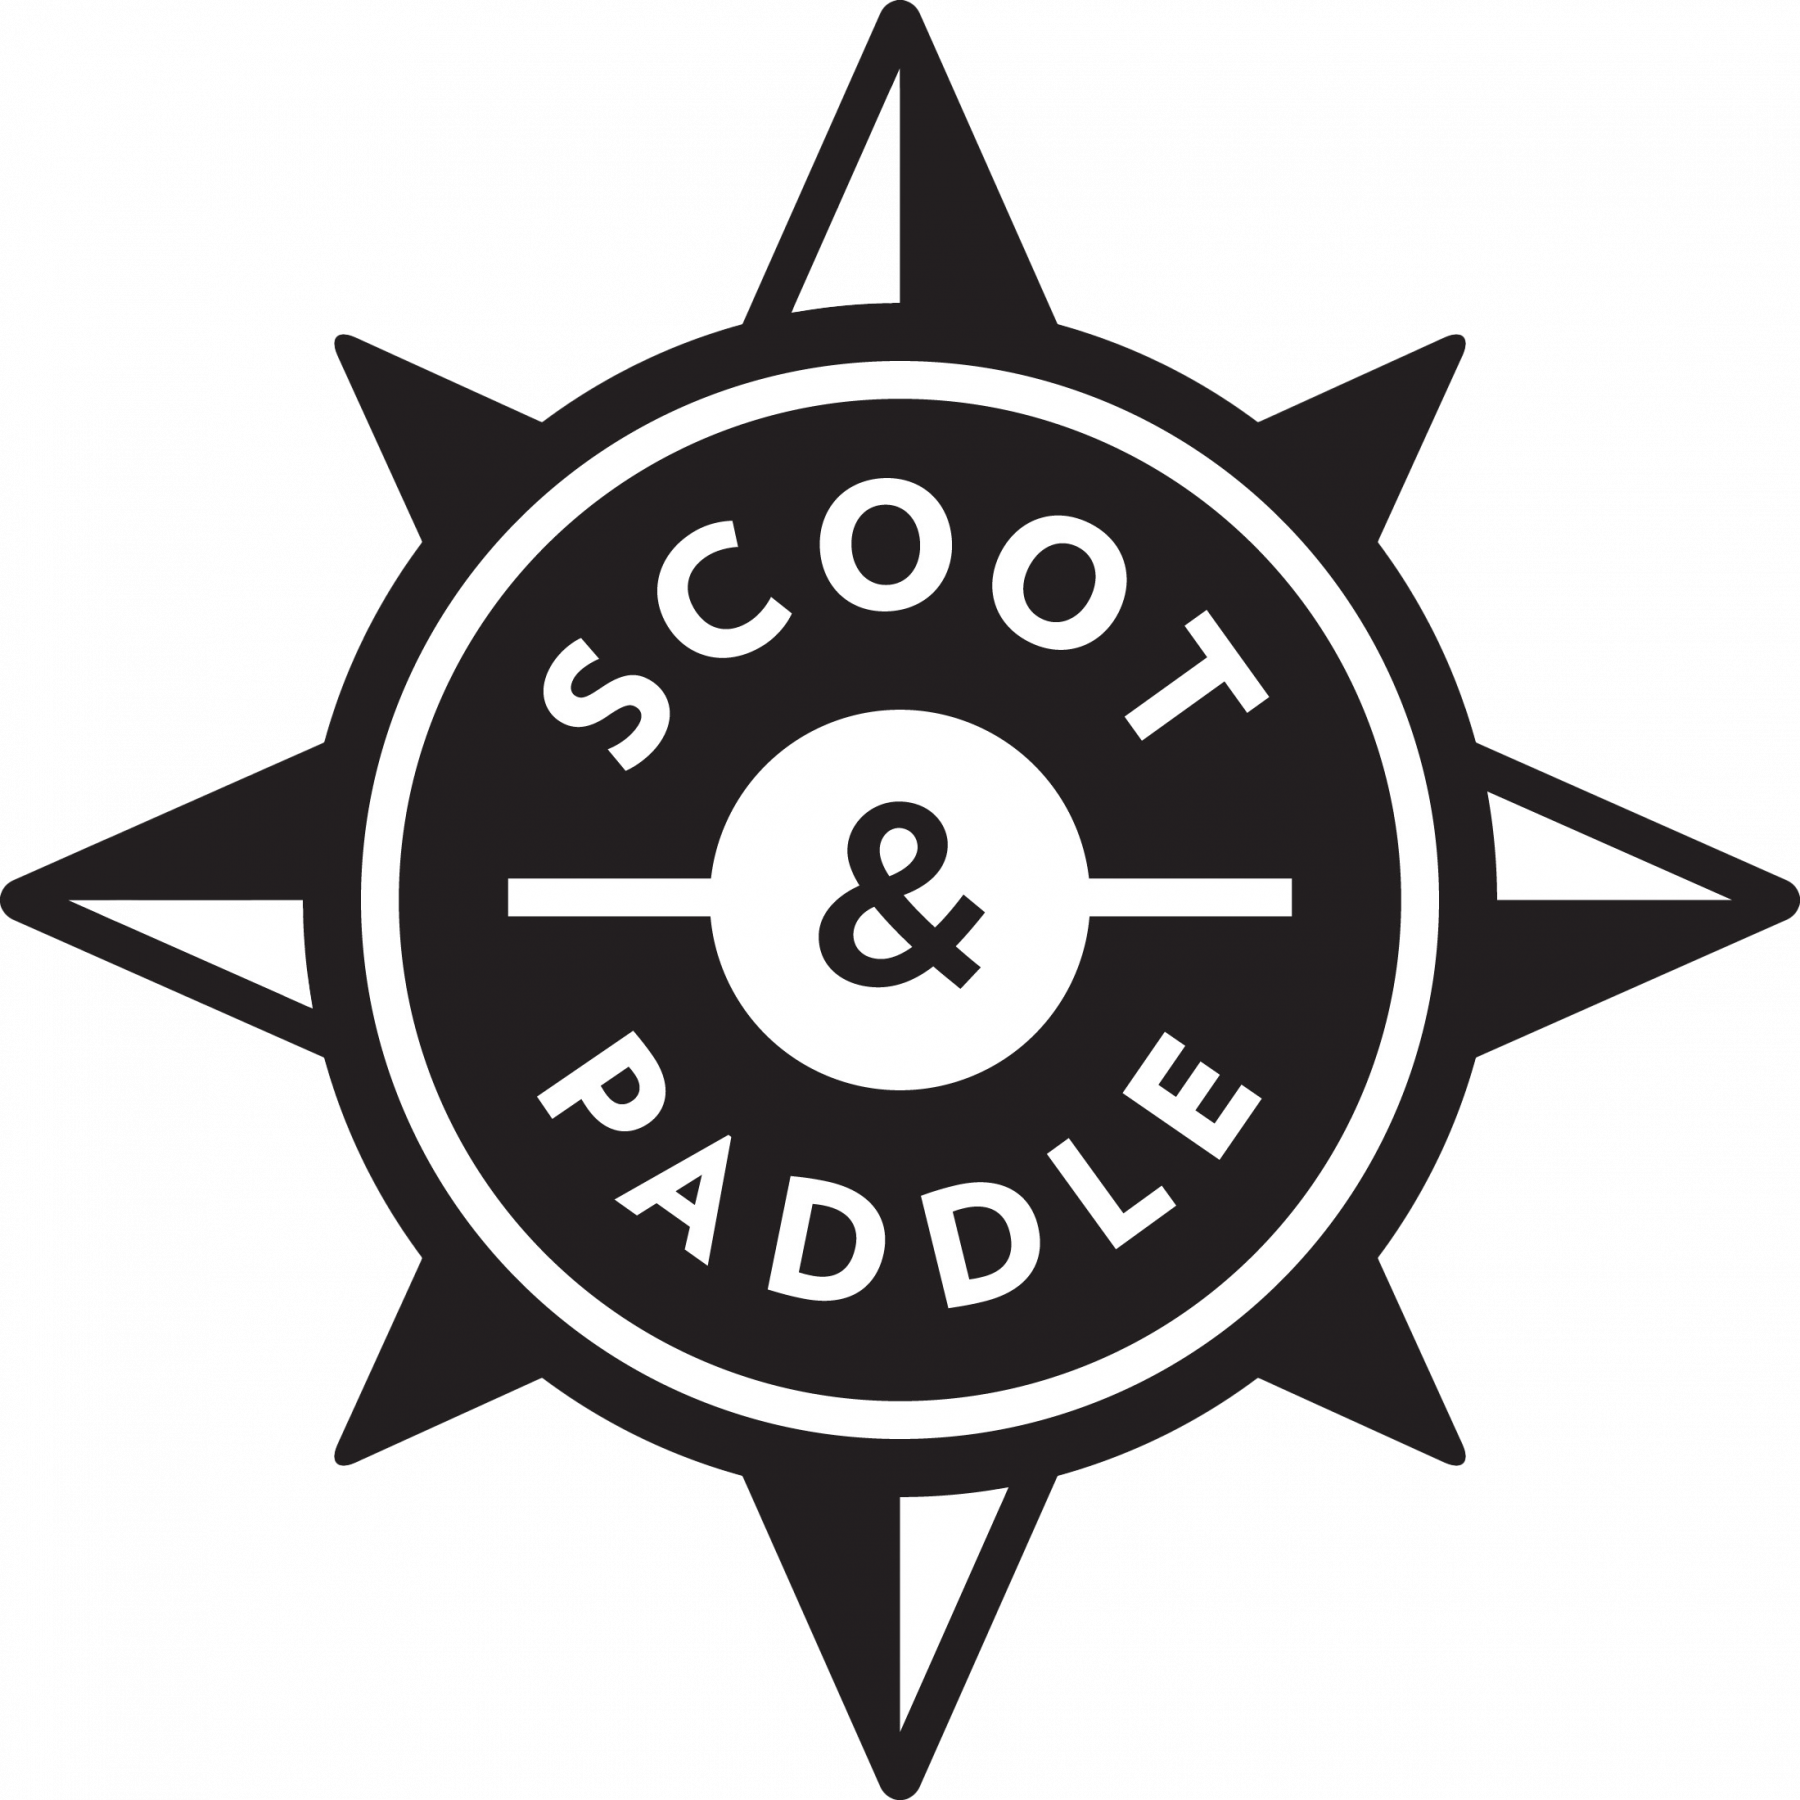 Scoot and Paddle